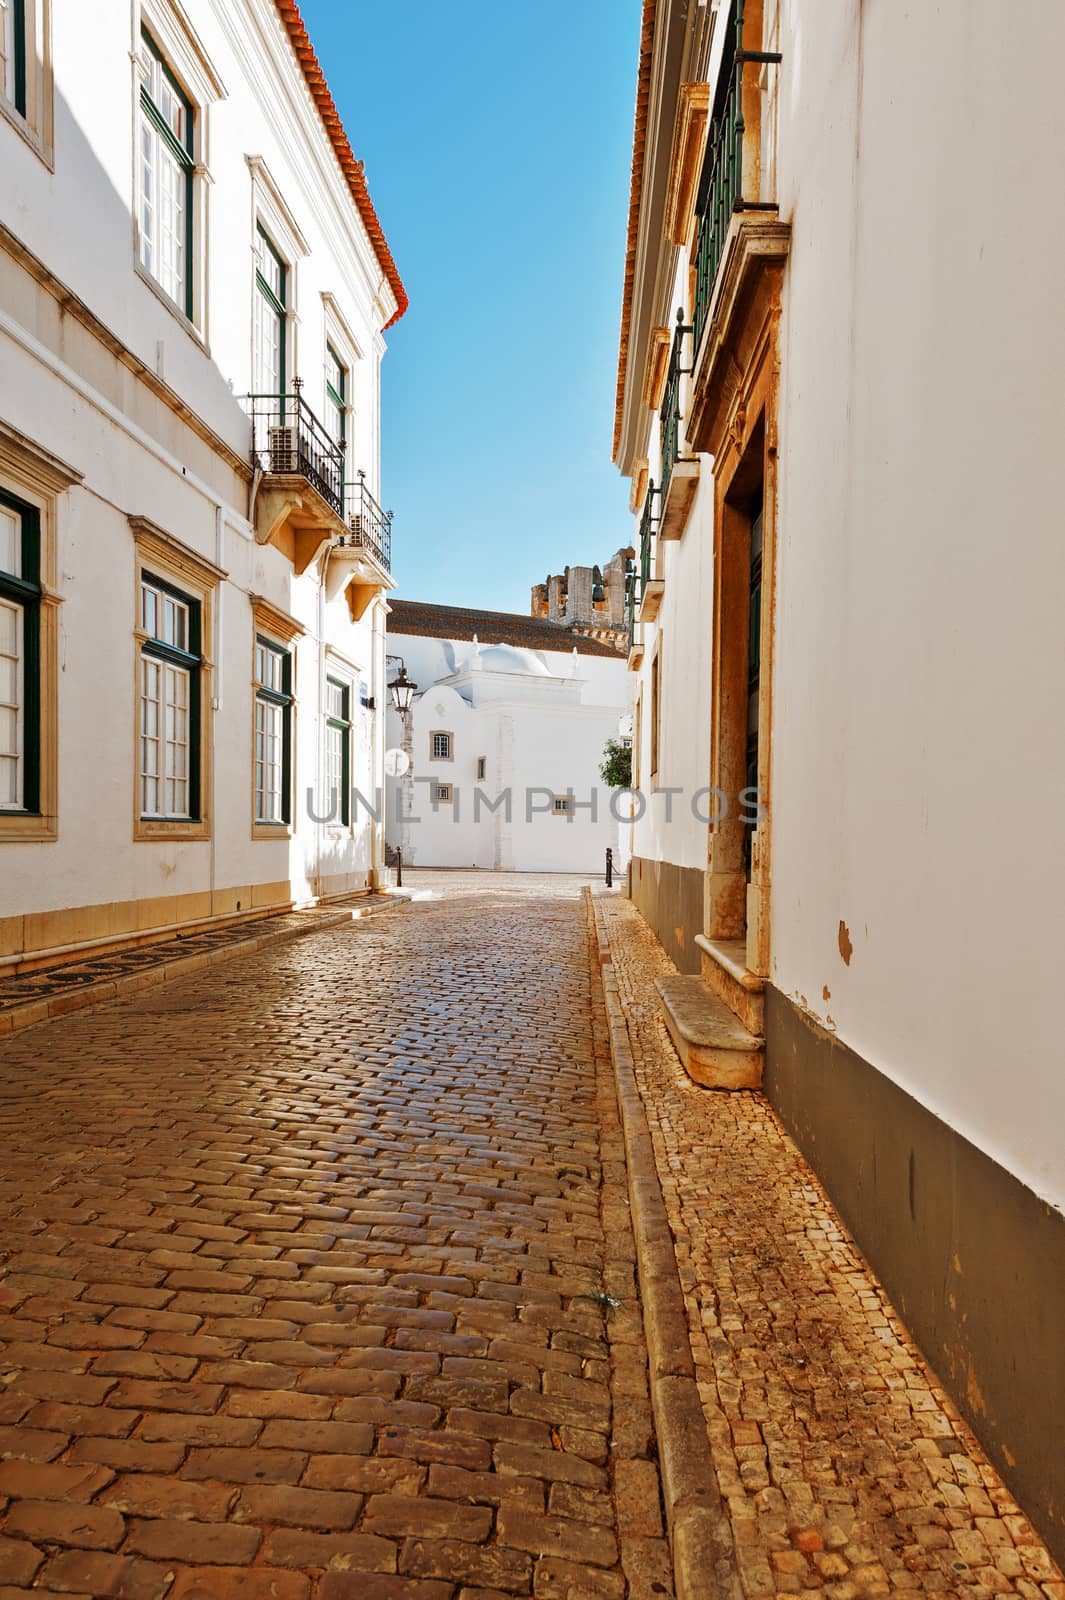 Narrow Street in the Medieval Portuguese City of Faro